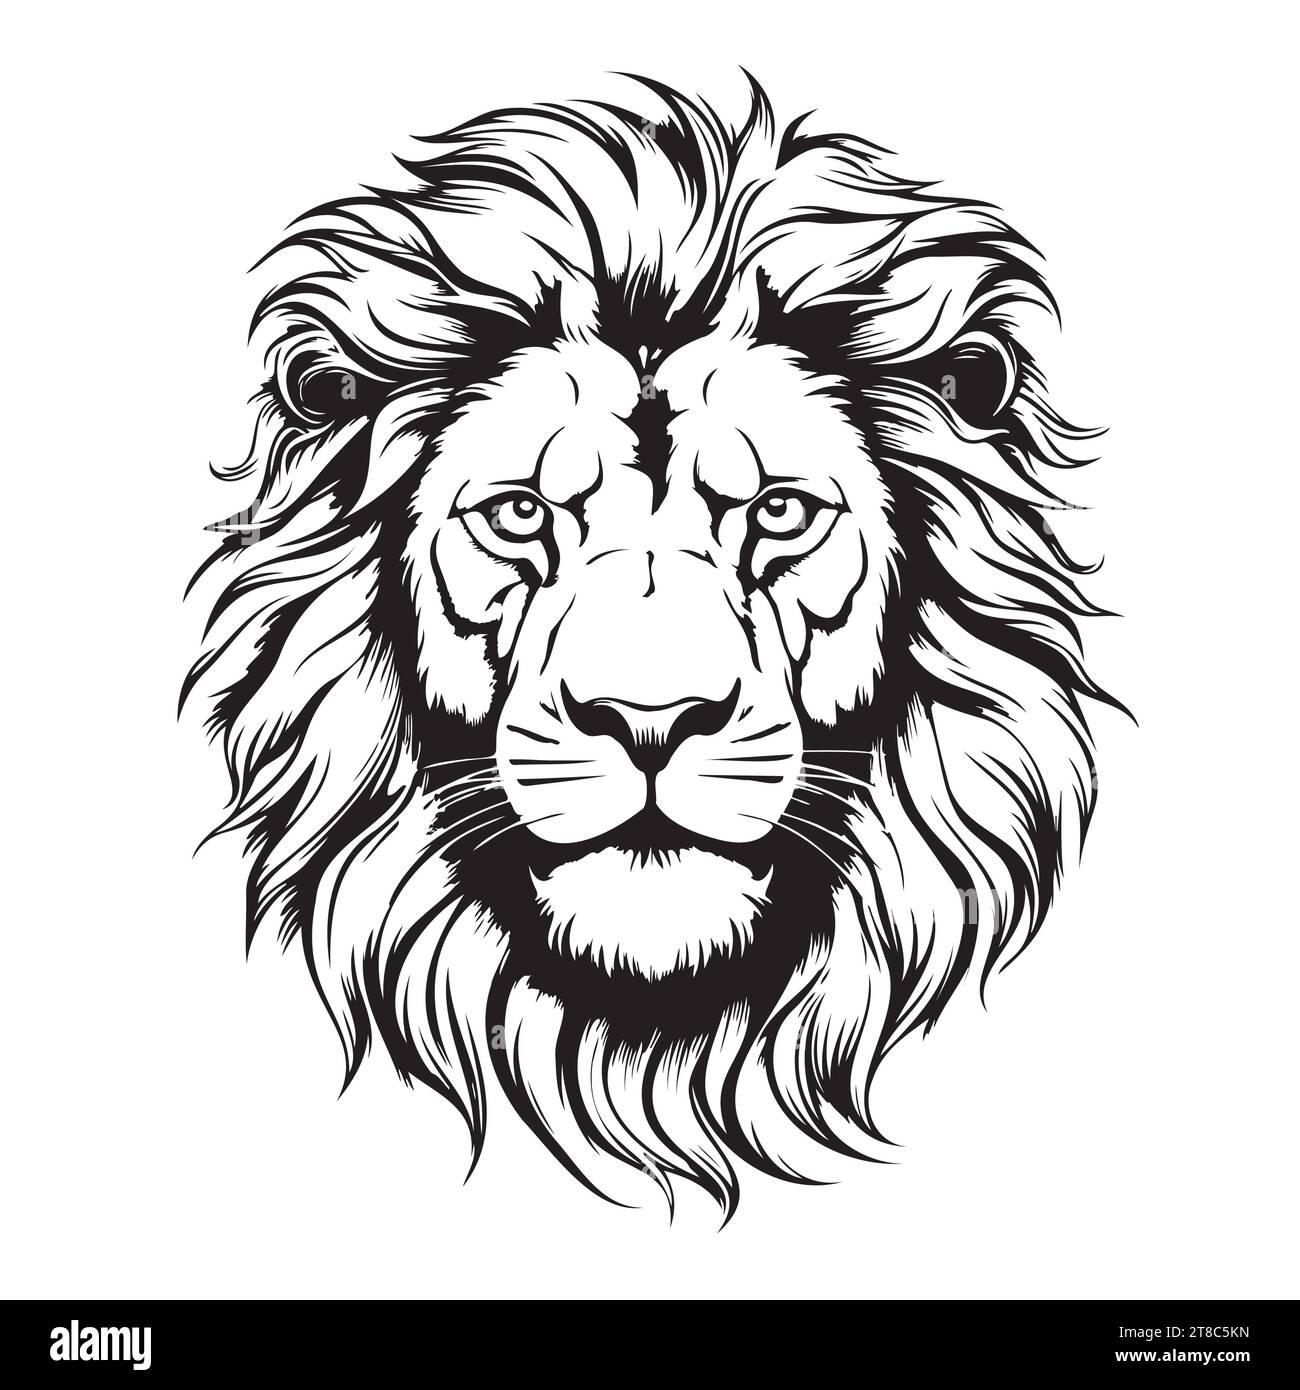 Lion face . Sketchy, graphical, black and white portrait of a lions head on a white background. Stock Vector